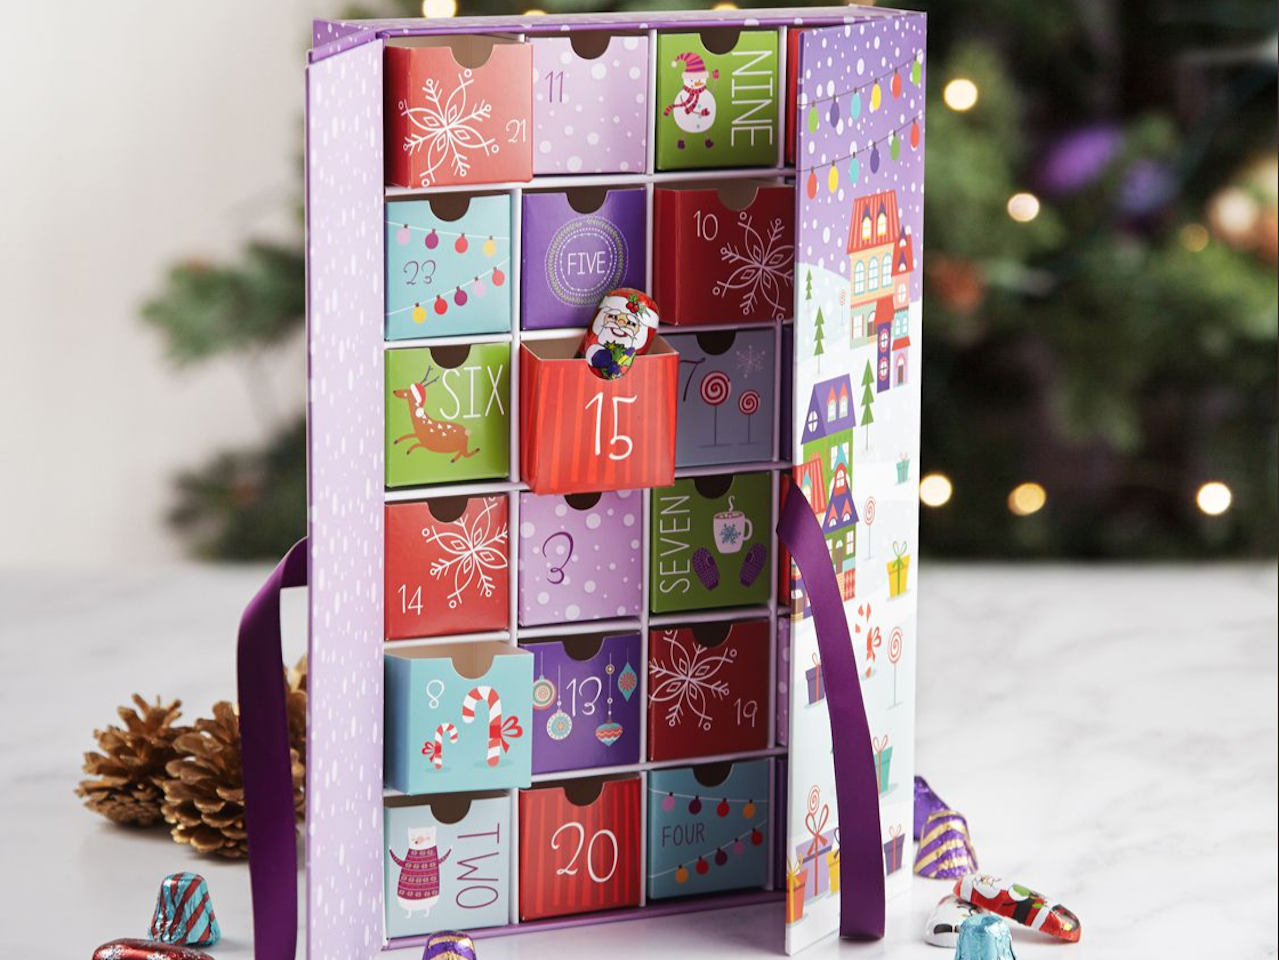 9 Oh So Scrumptious Advent Calendars For The Food Lover Chatelaine